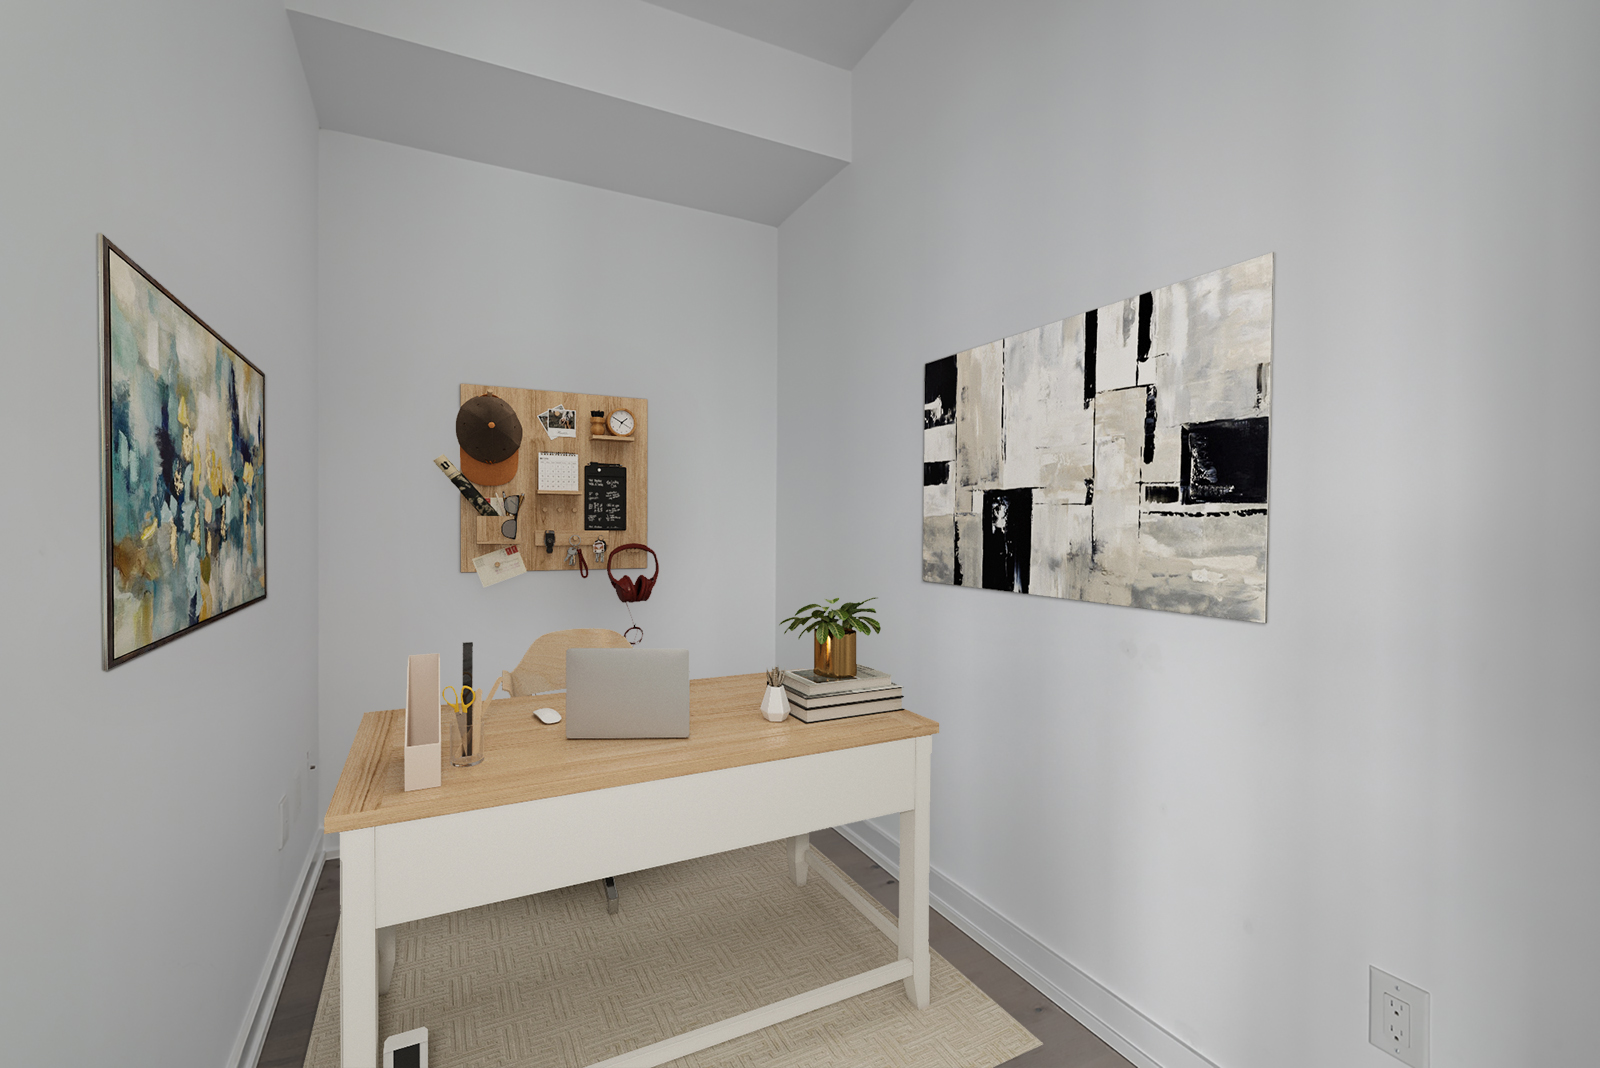 488 University Ave den with 3d-rendered desk and paintings.